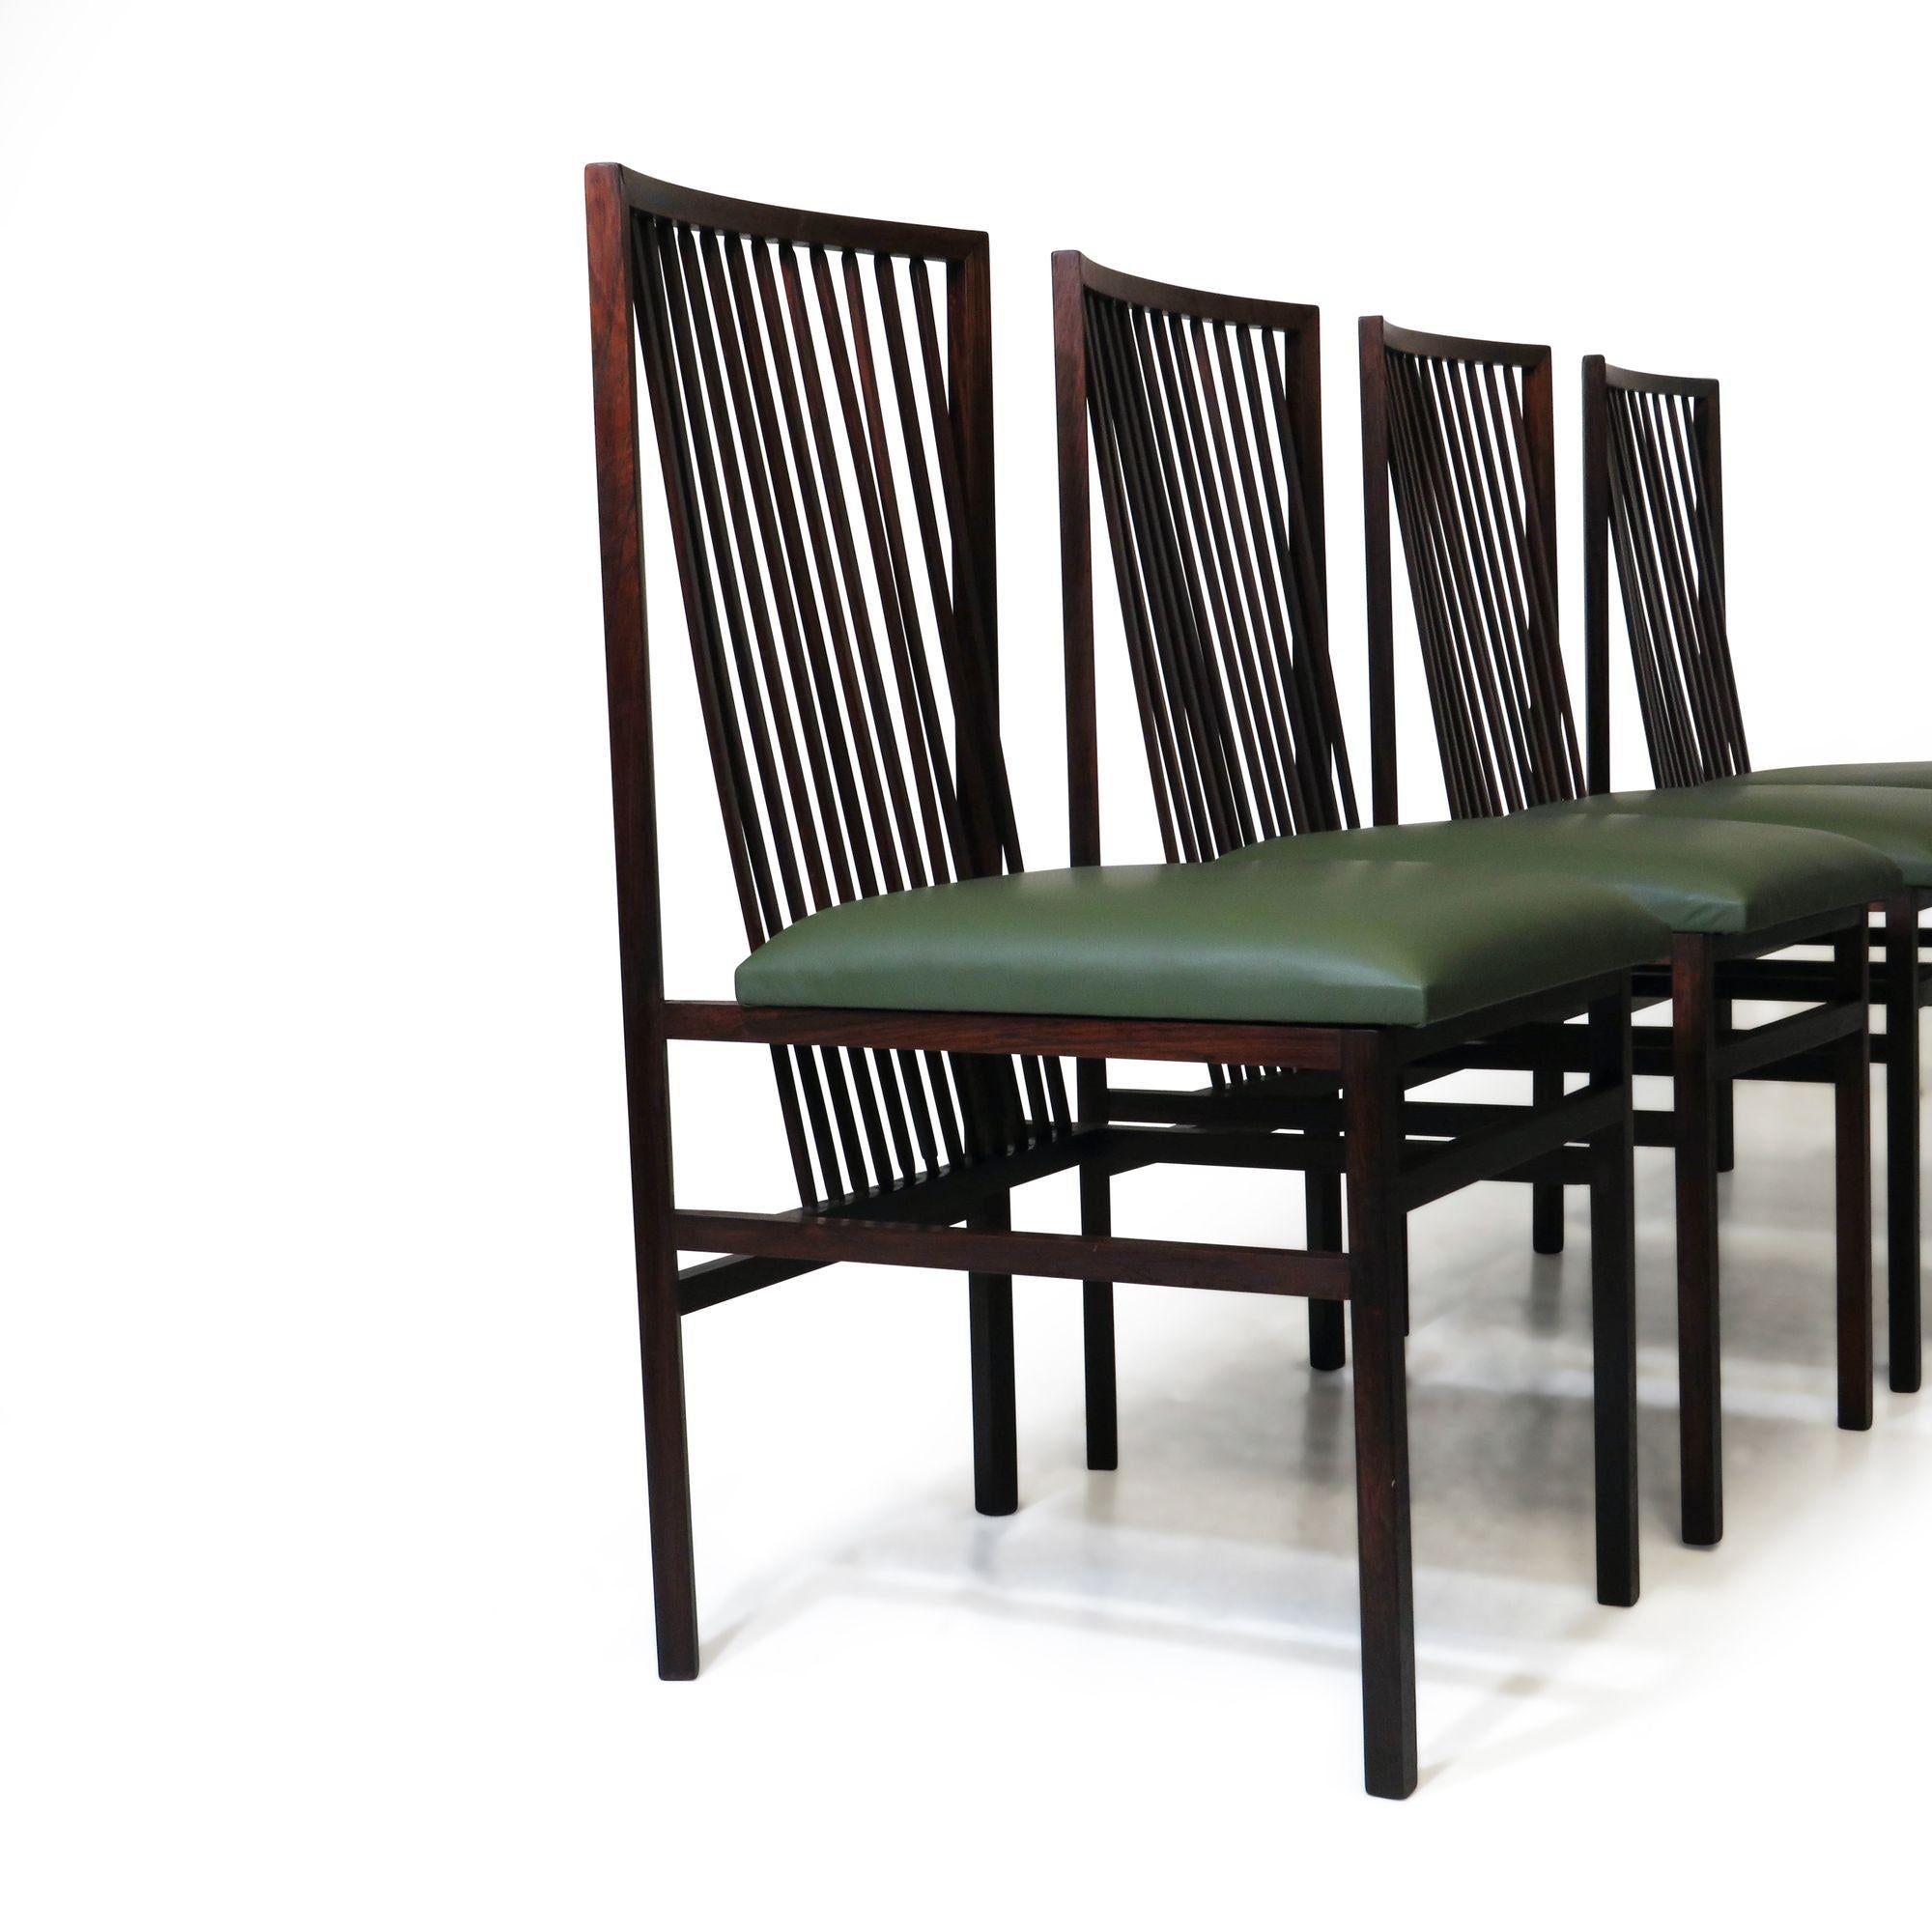 Eight Estrutural Structural Brazil Modern Chairs For Sale 2